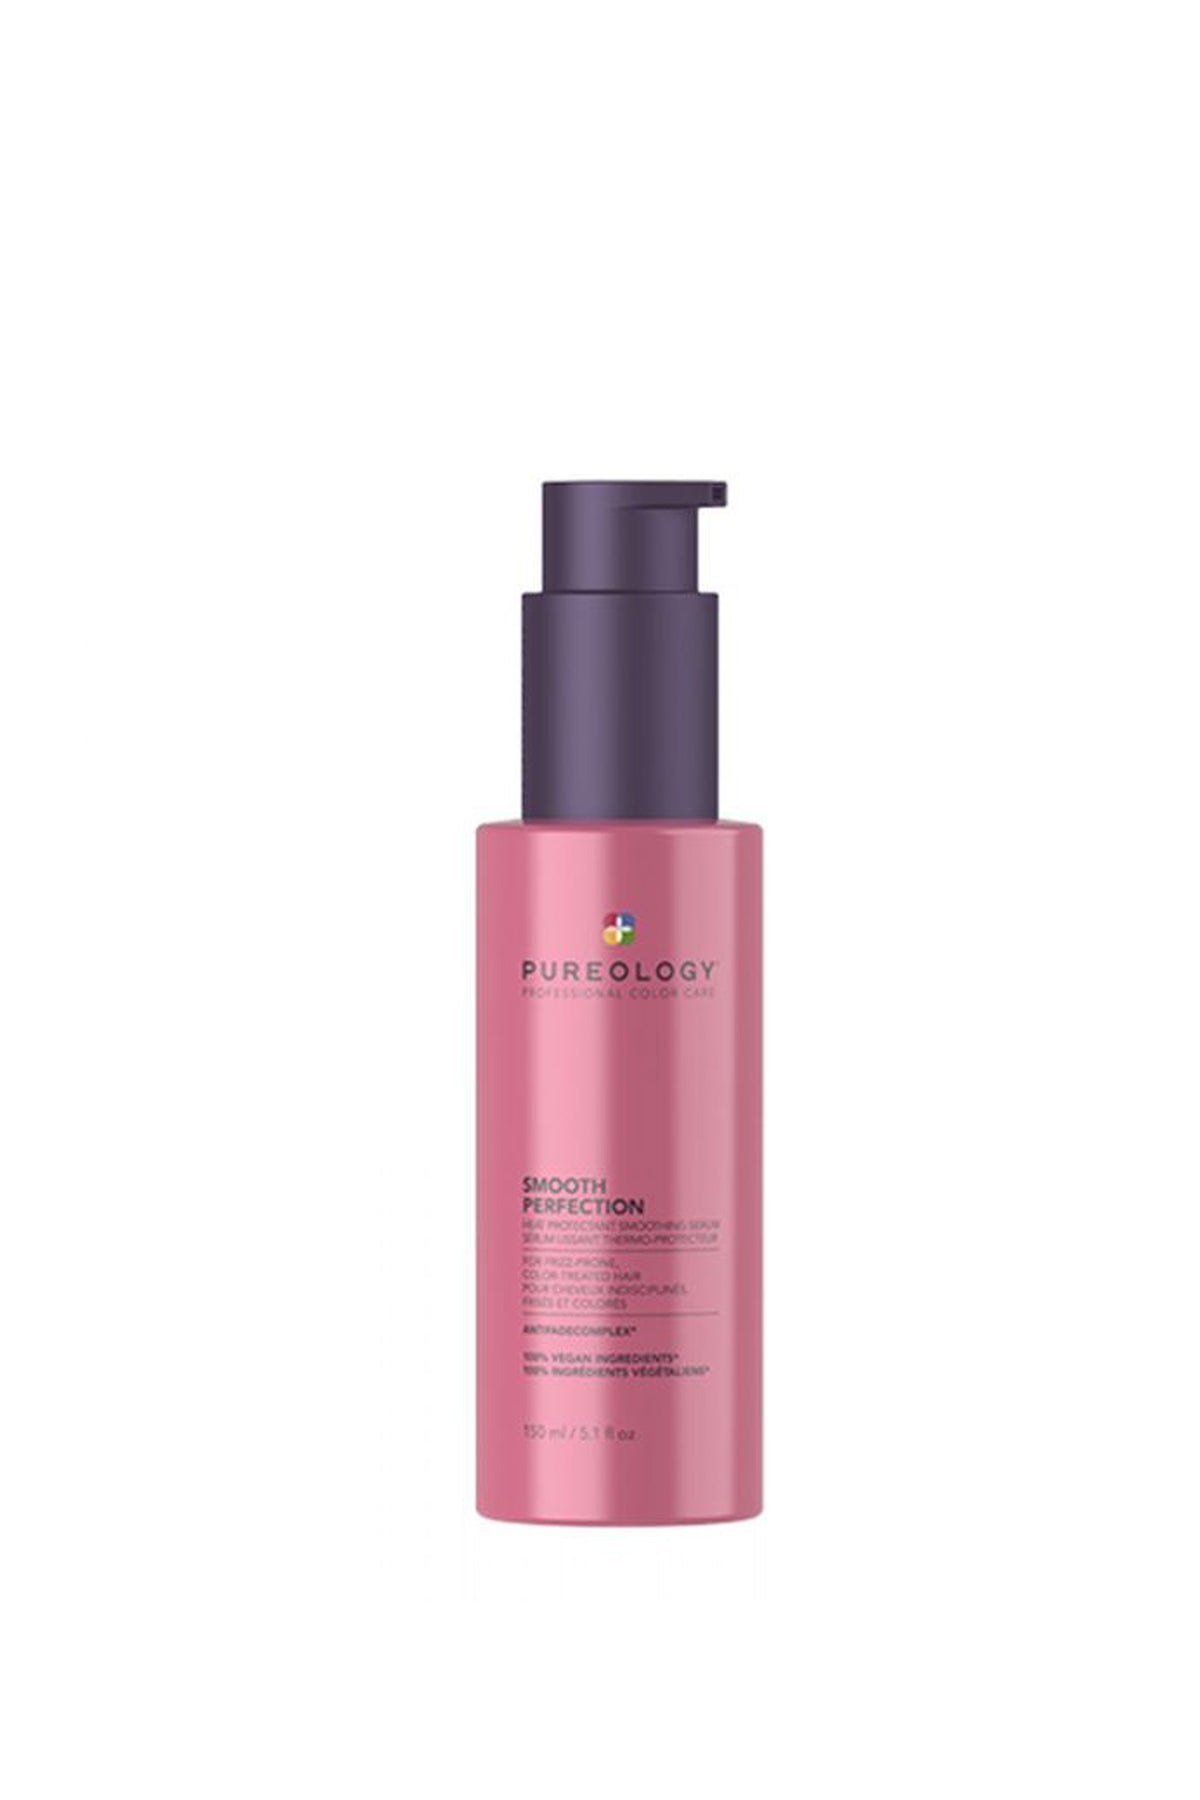 pureology smooth perfection treatment